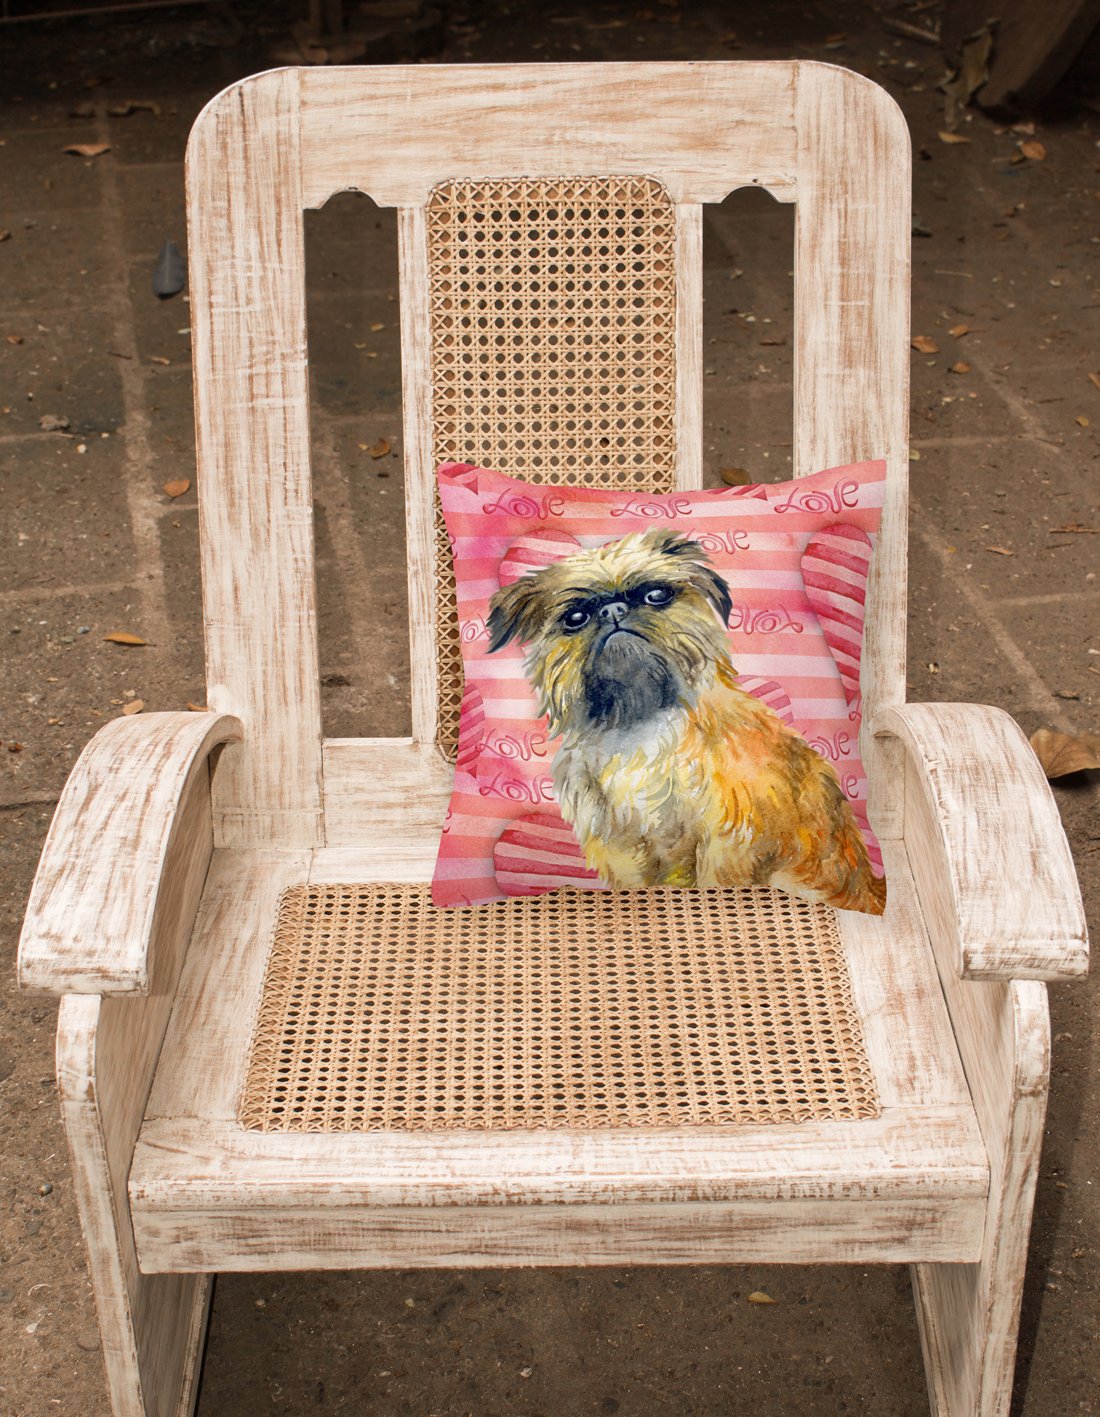 Brussels Griffon Love Fabric Decorative Pillow BB9774PW1818 by Caroline's Treasures